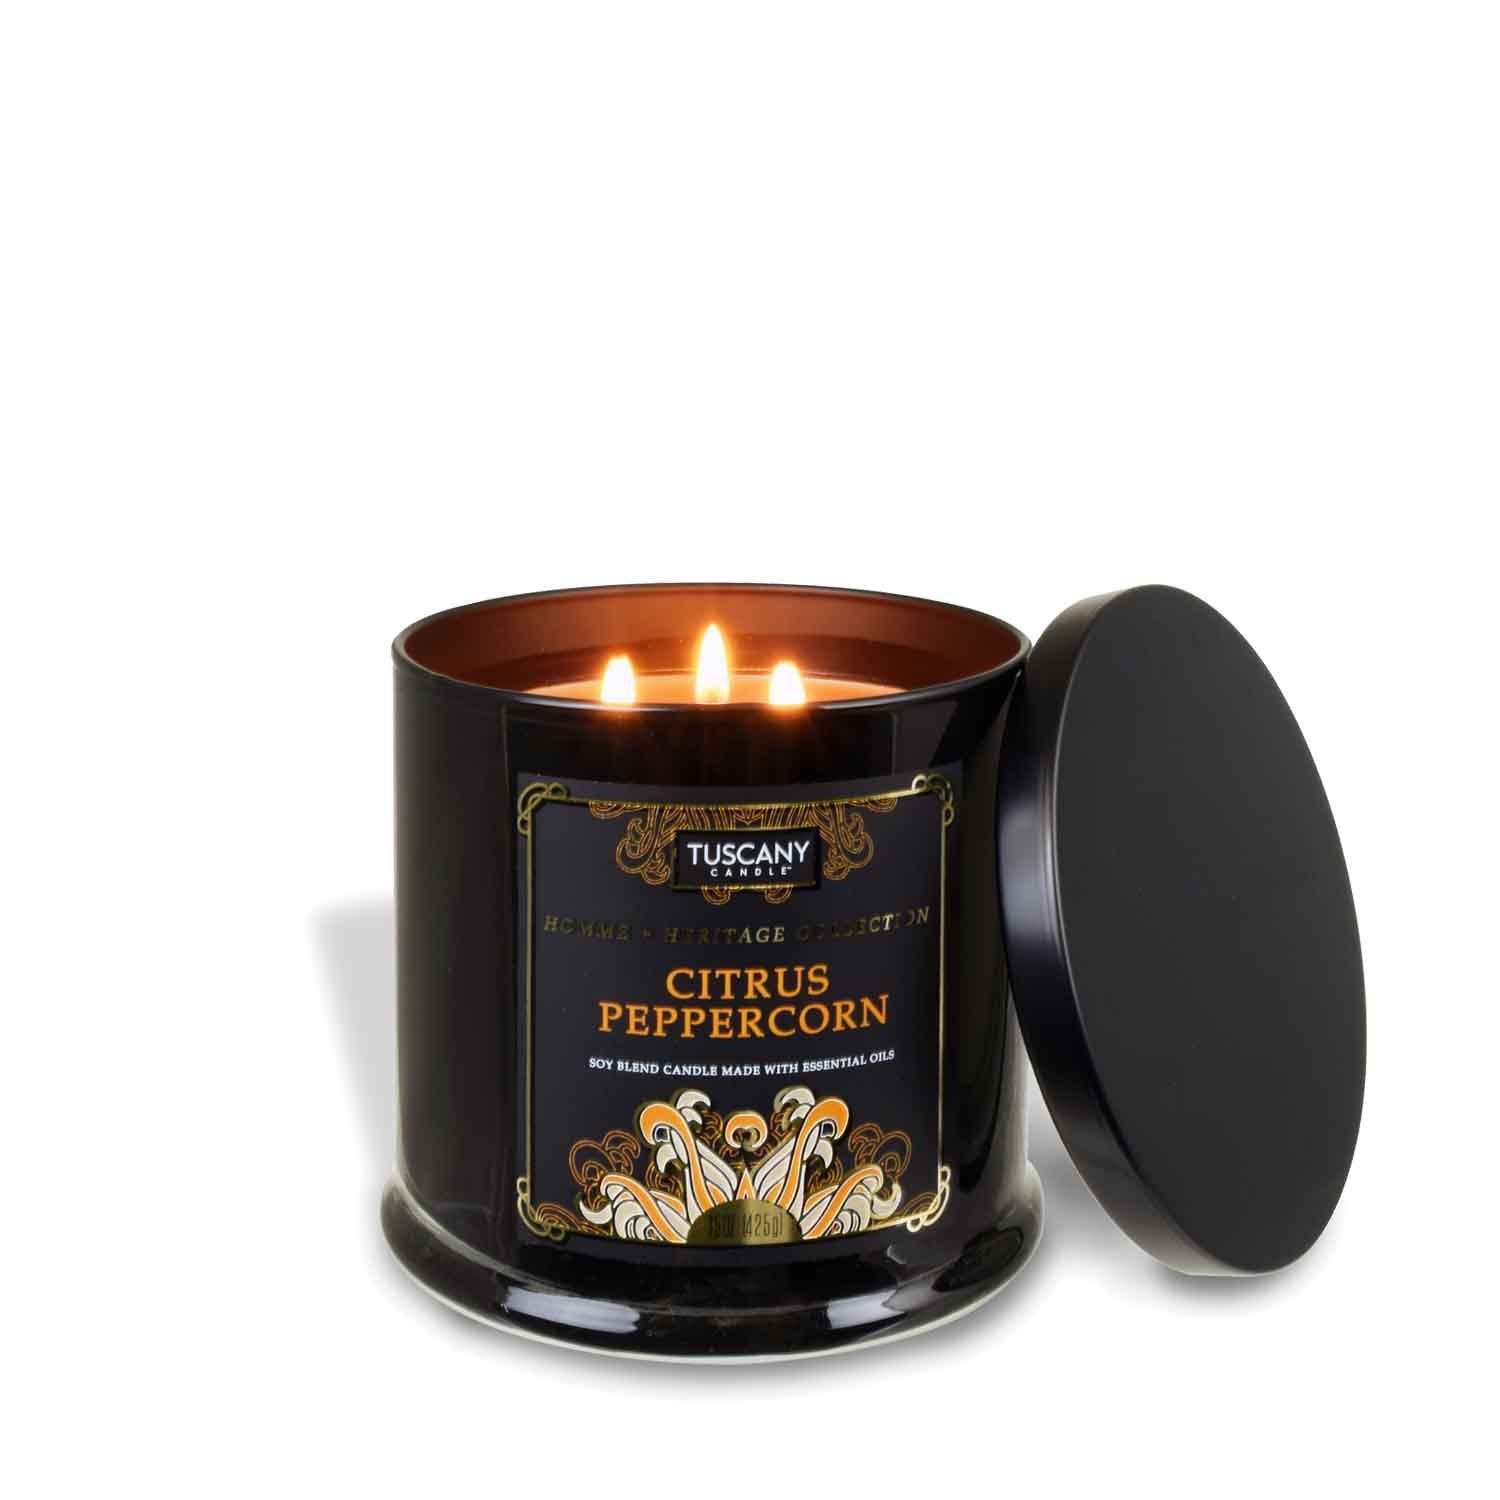 A Citrus Peppercorn scented candle in a black tin on a white background.